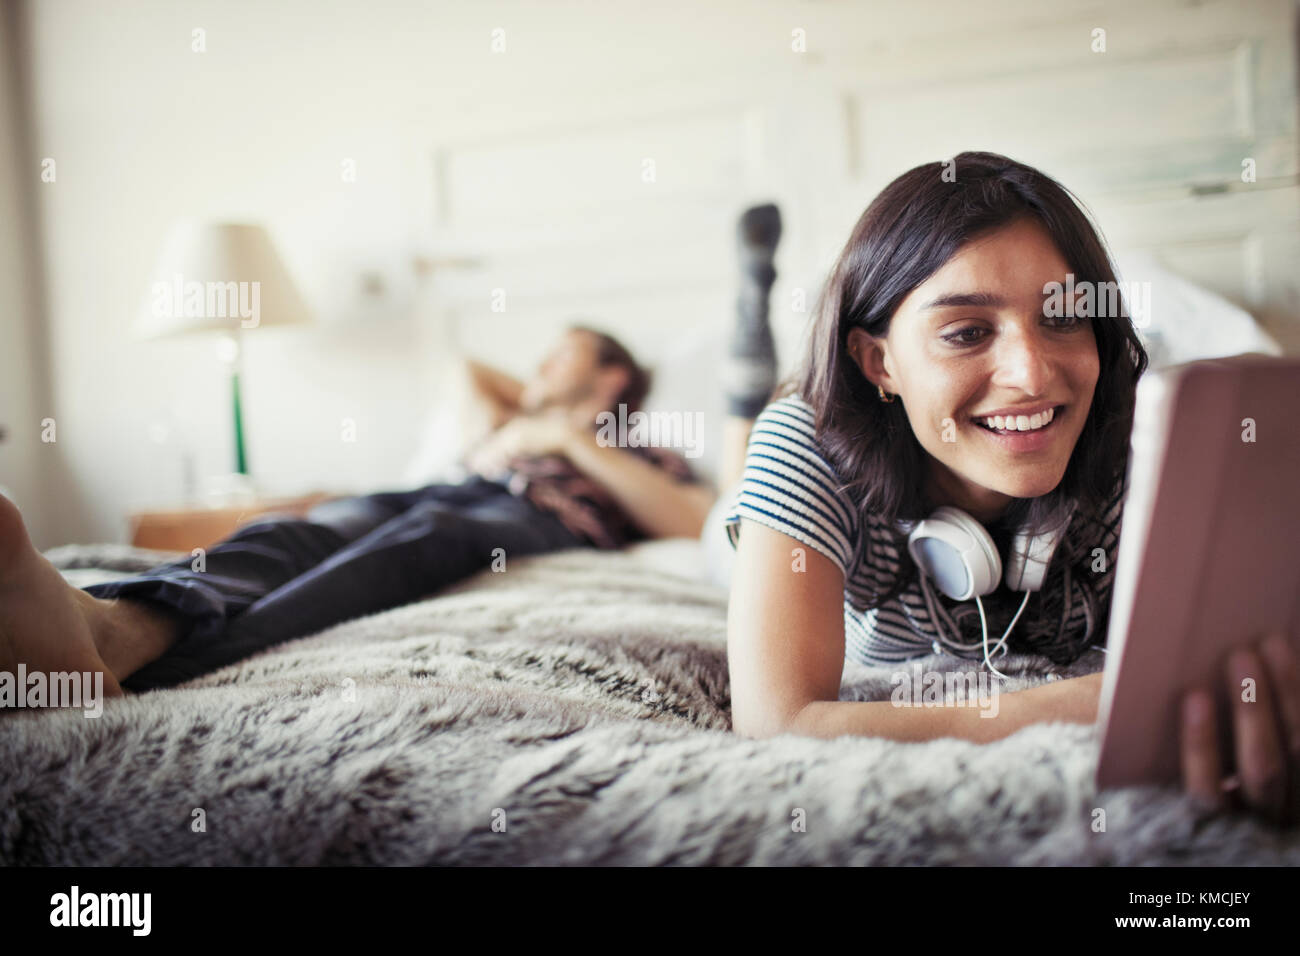 Smiling young woman with headphones using digital tablet on bed Stock Photo